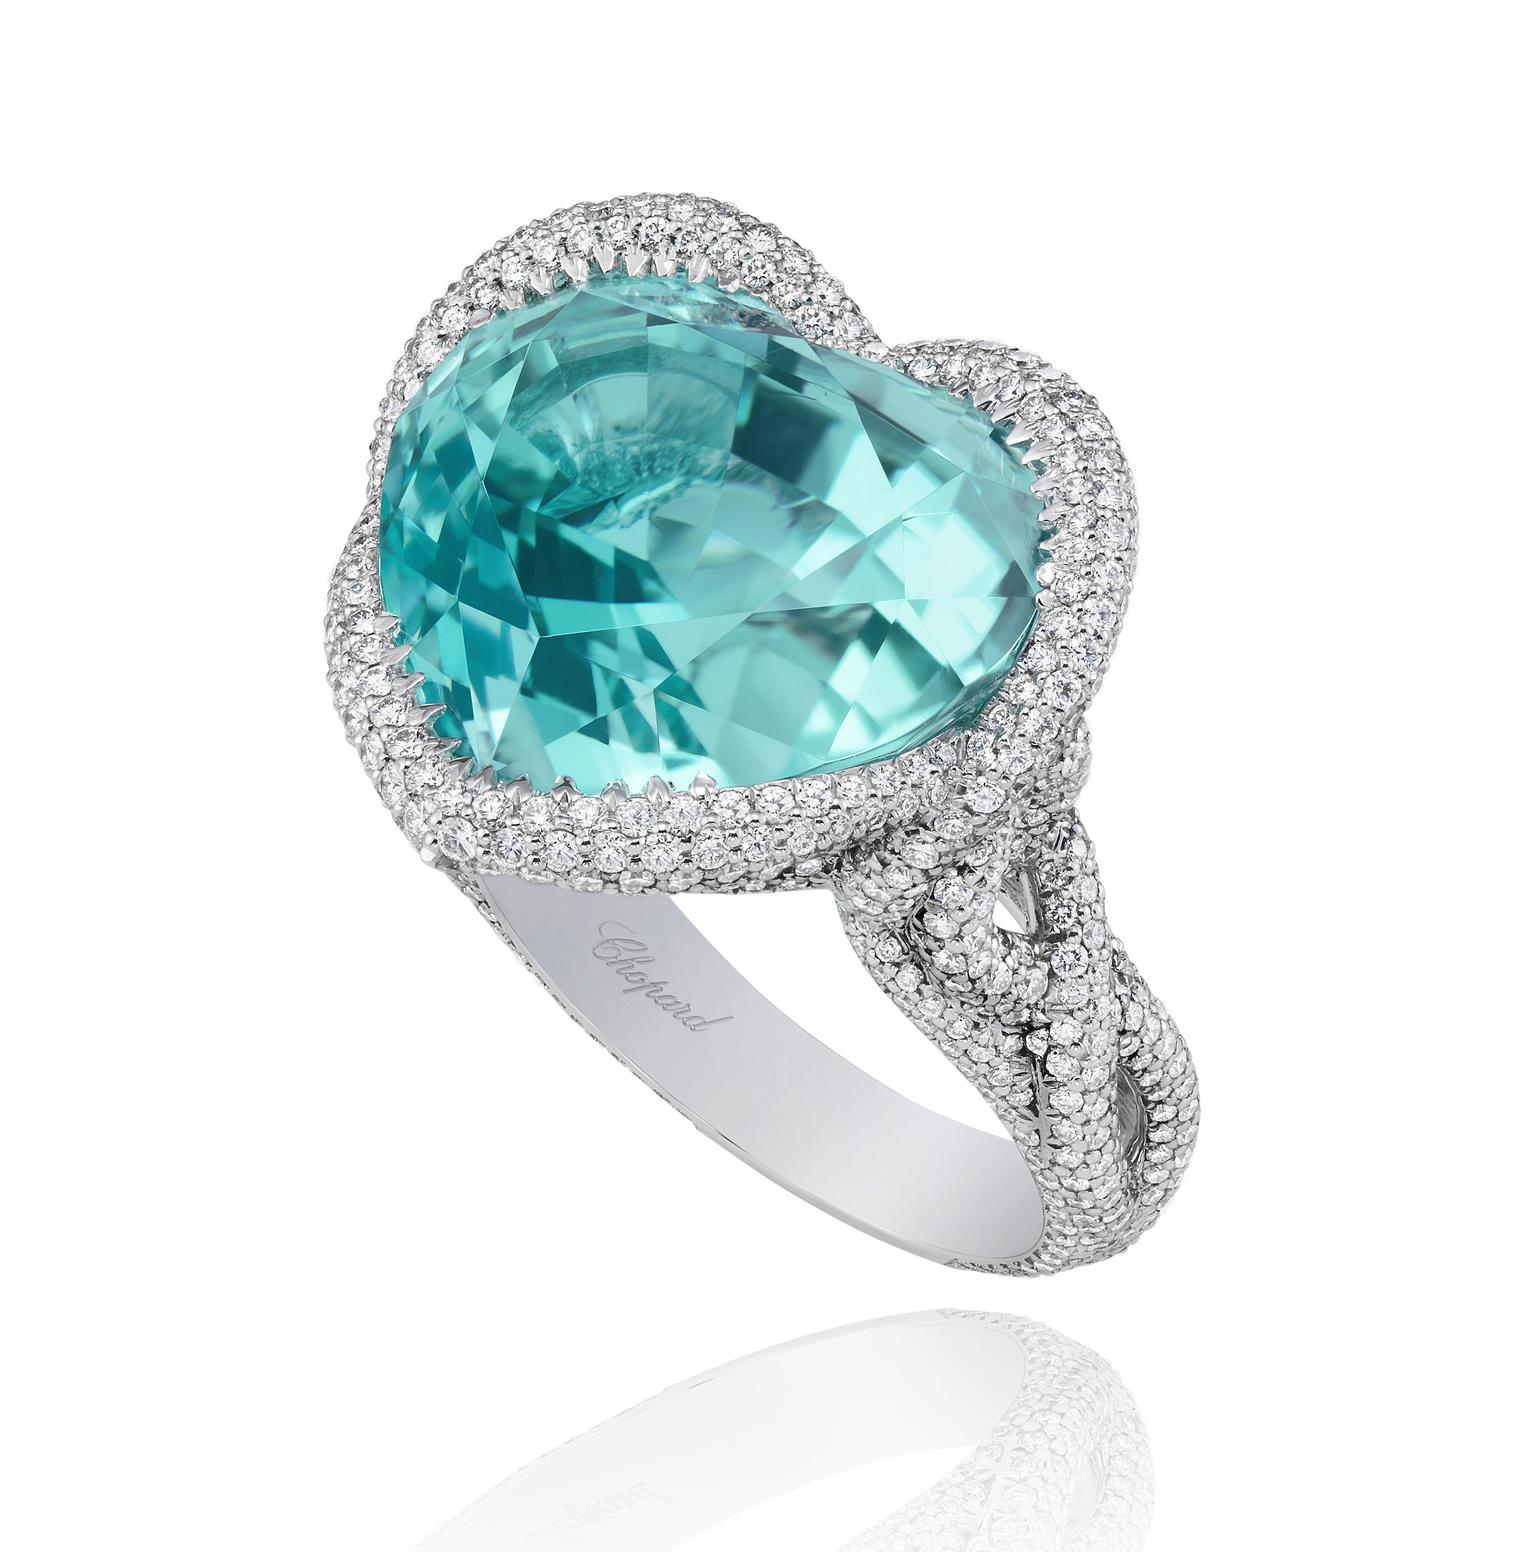 Chopard-Paraiba-Tourmaline--Ring-from-the-Red-Carpet-Collection-2013.jpg